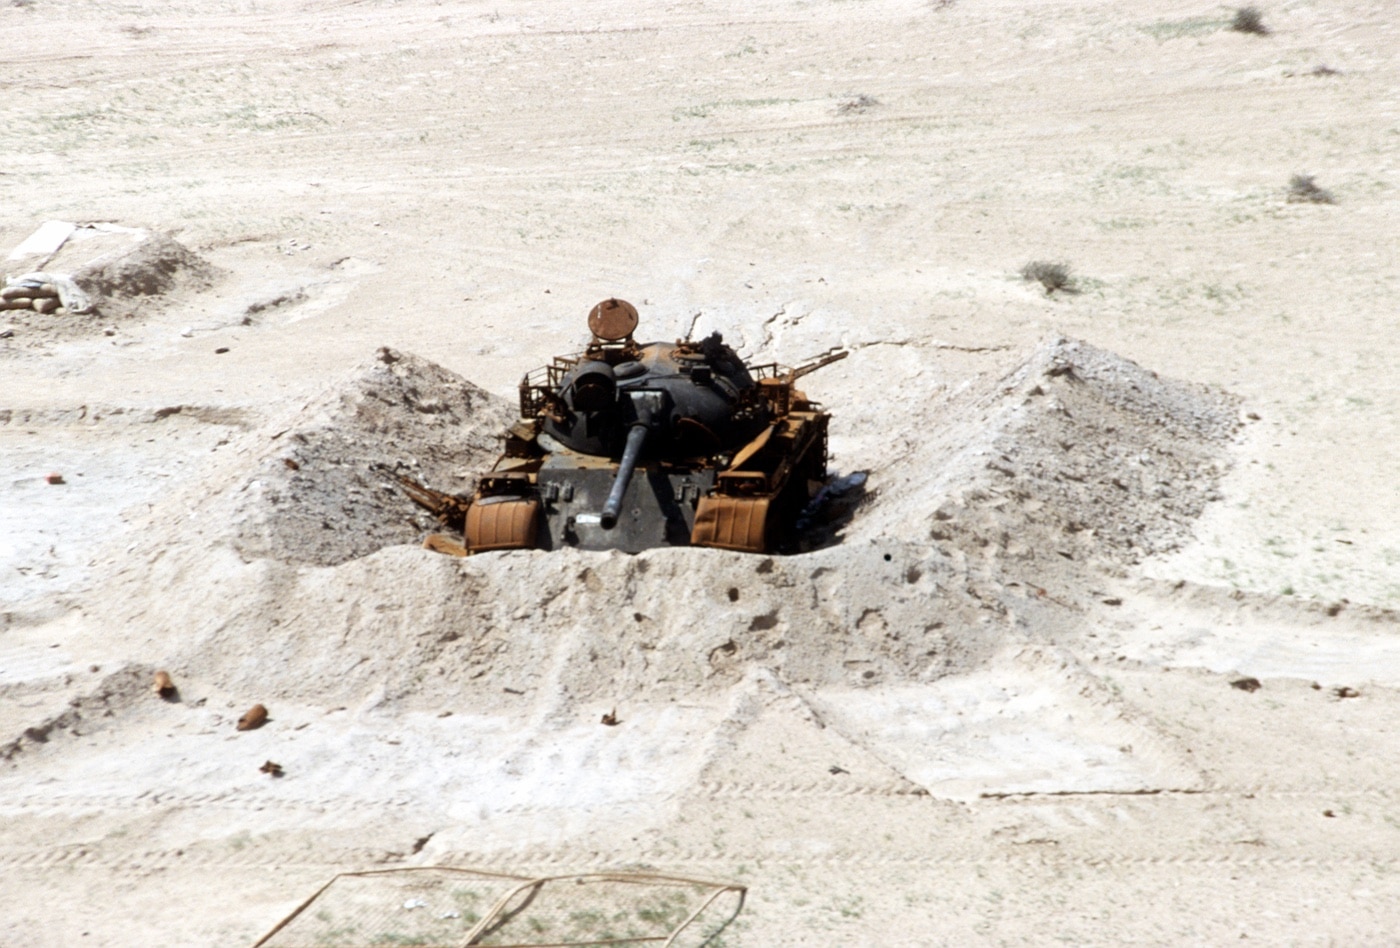 iraqi t-72 tank destroyed by us forces